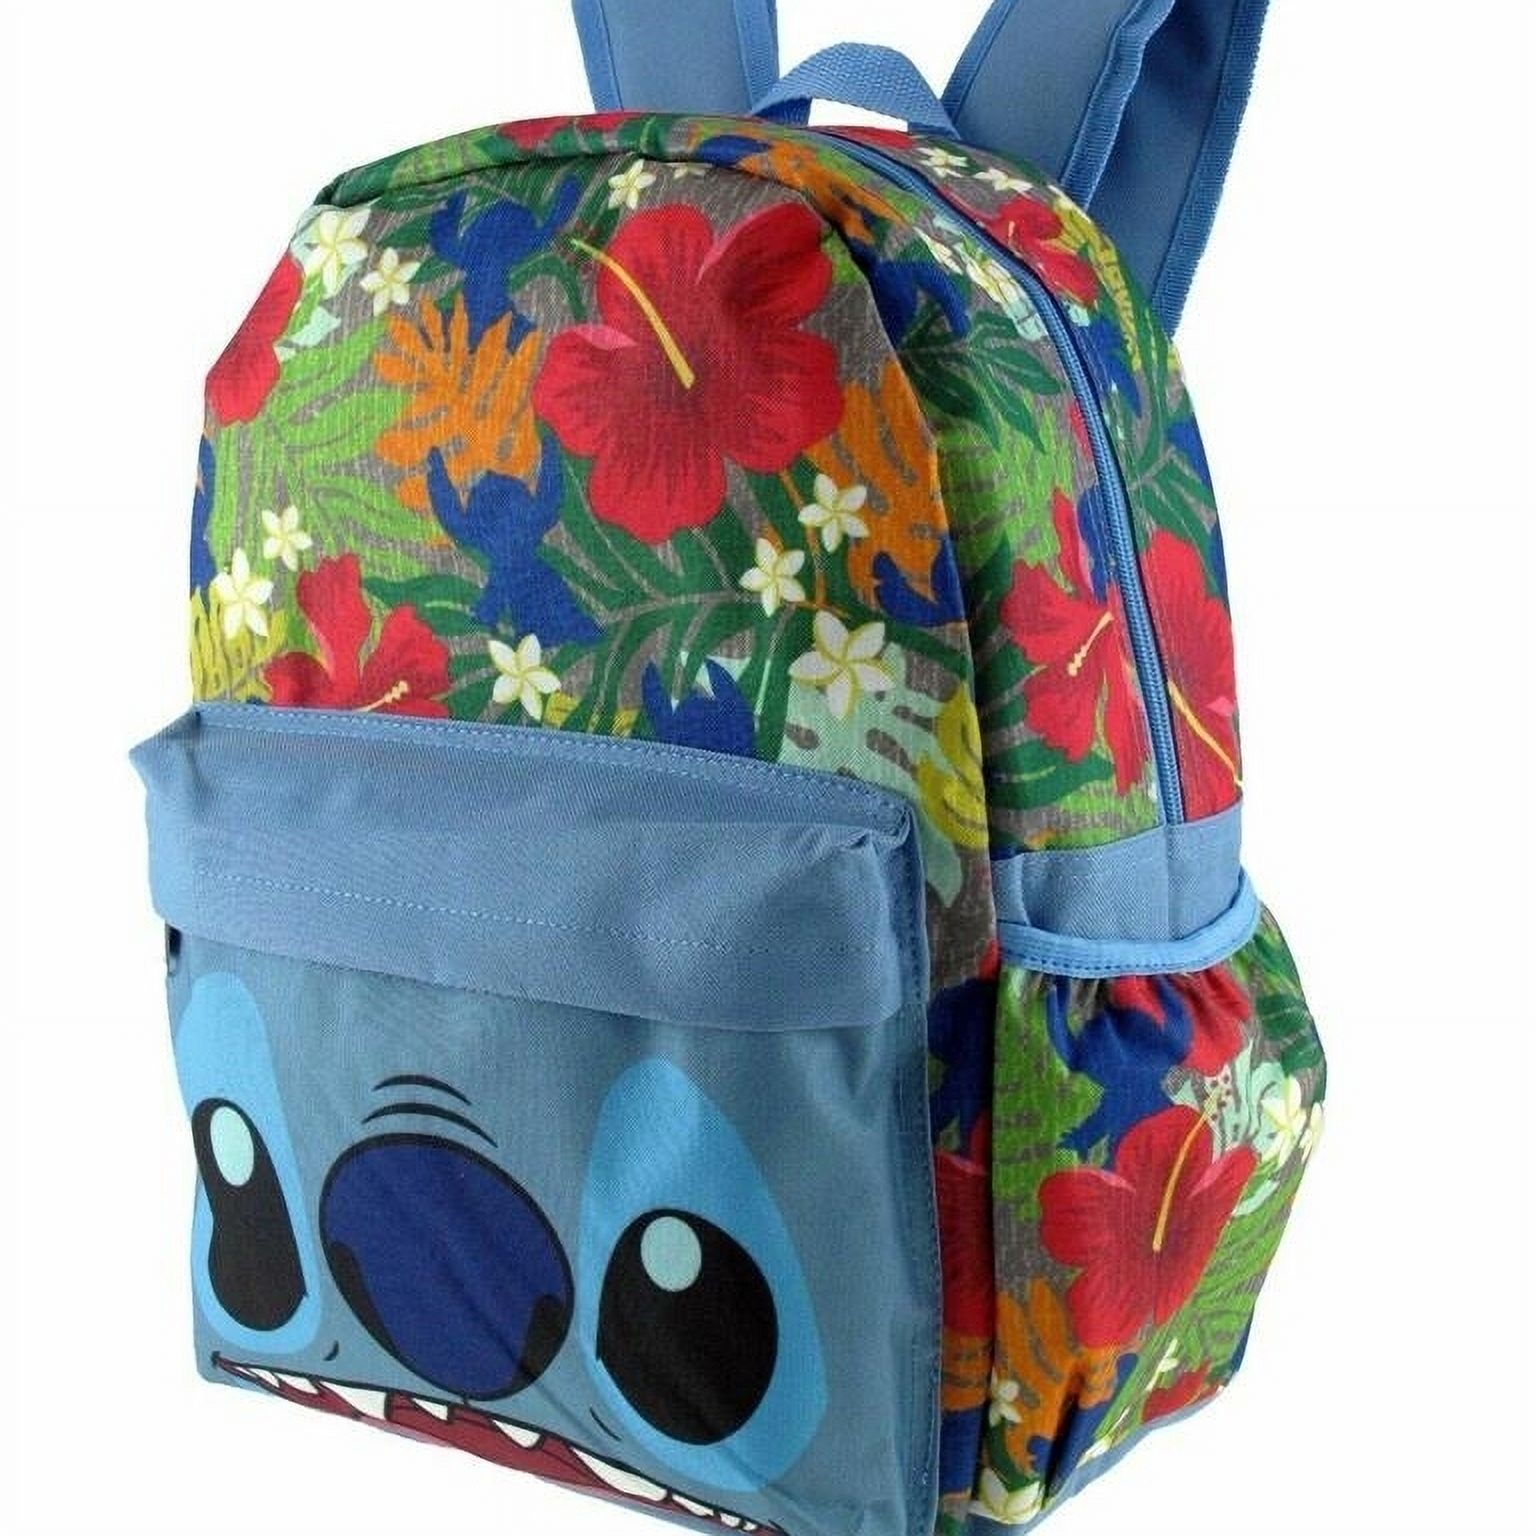 Disney Lilo and Stitch Backpack 16" Canvas Big Face Large All over Print - New with box/tags - image 2 of 2